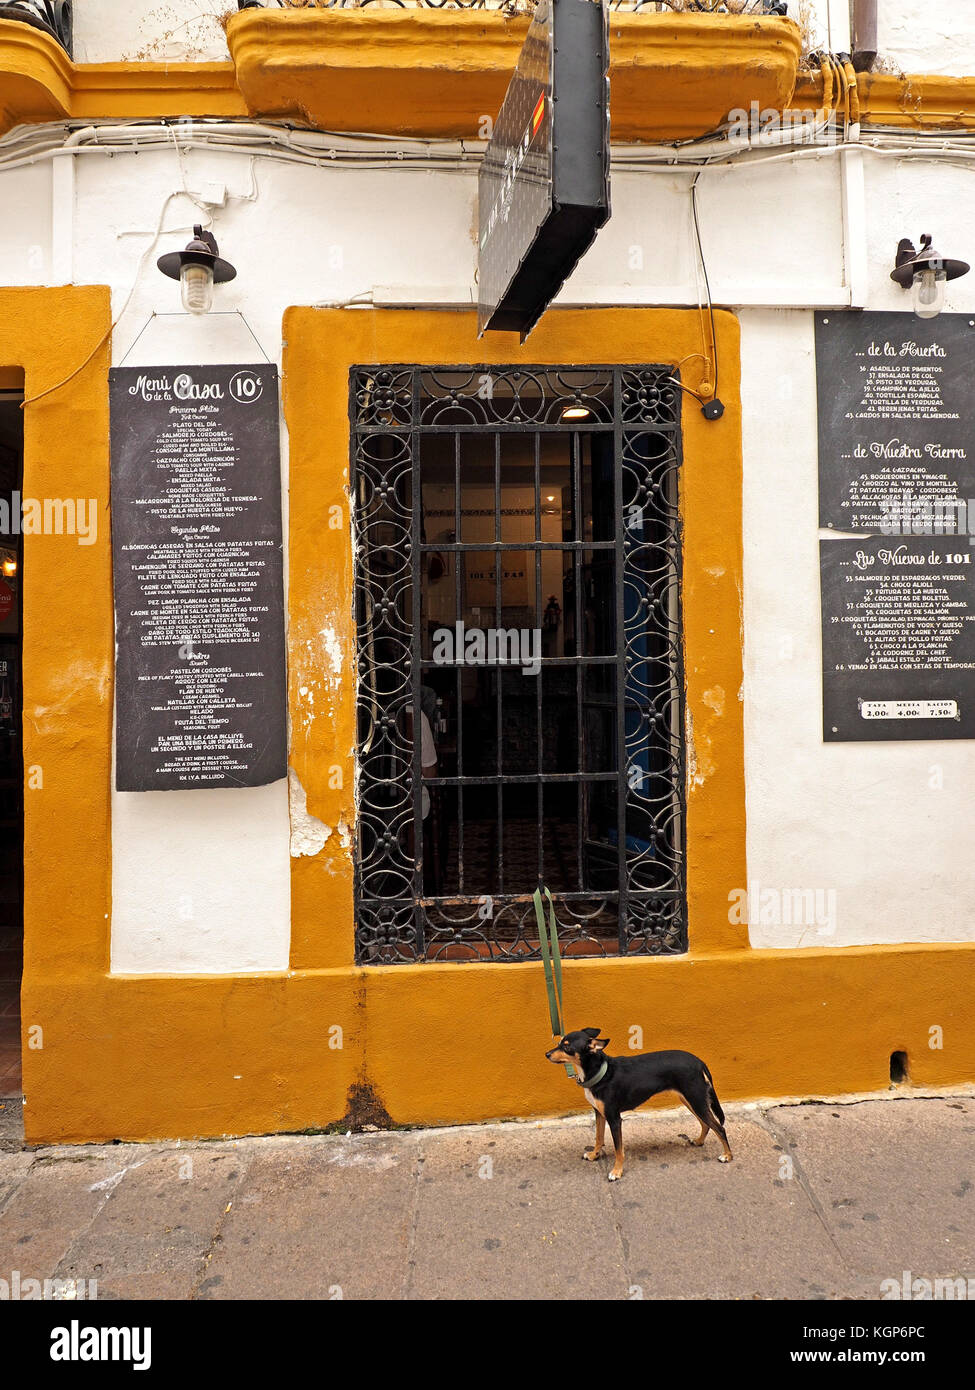 street view of small dog tied outside to ornate ironwork grille of eating establishment window in old quarter of Córdoba, Spain Stock Photo